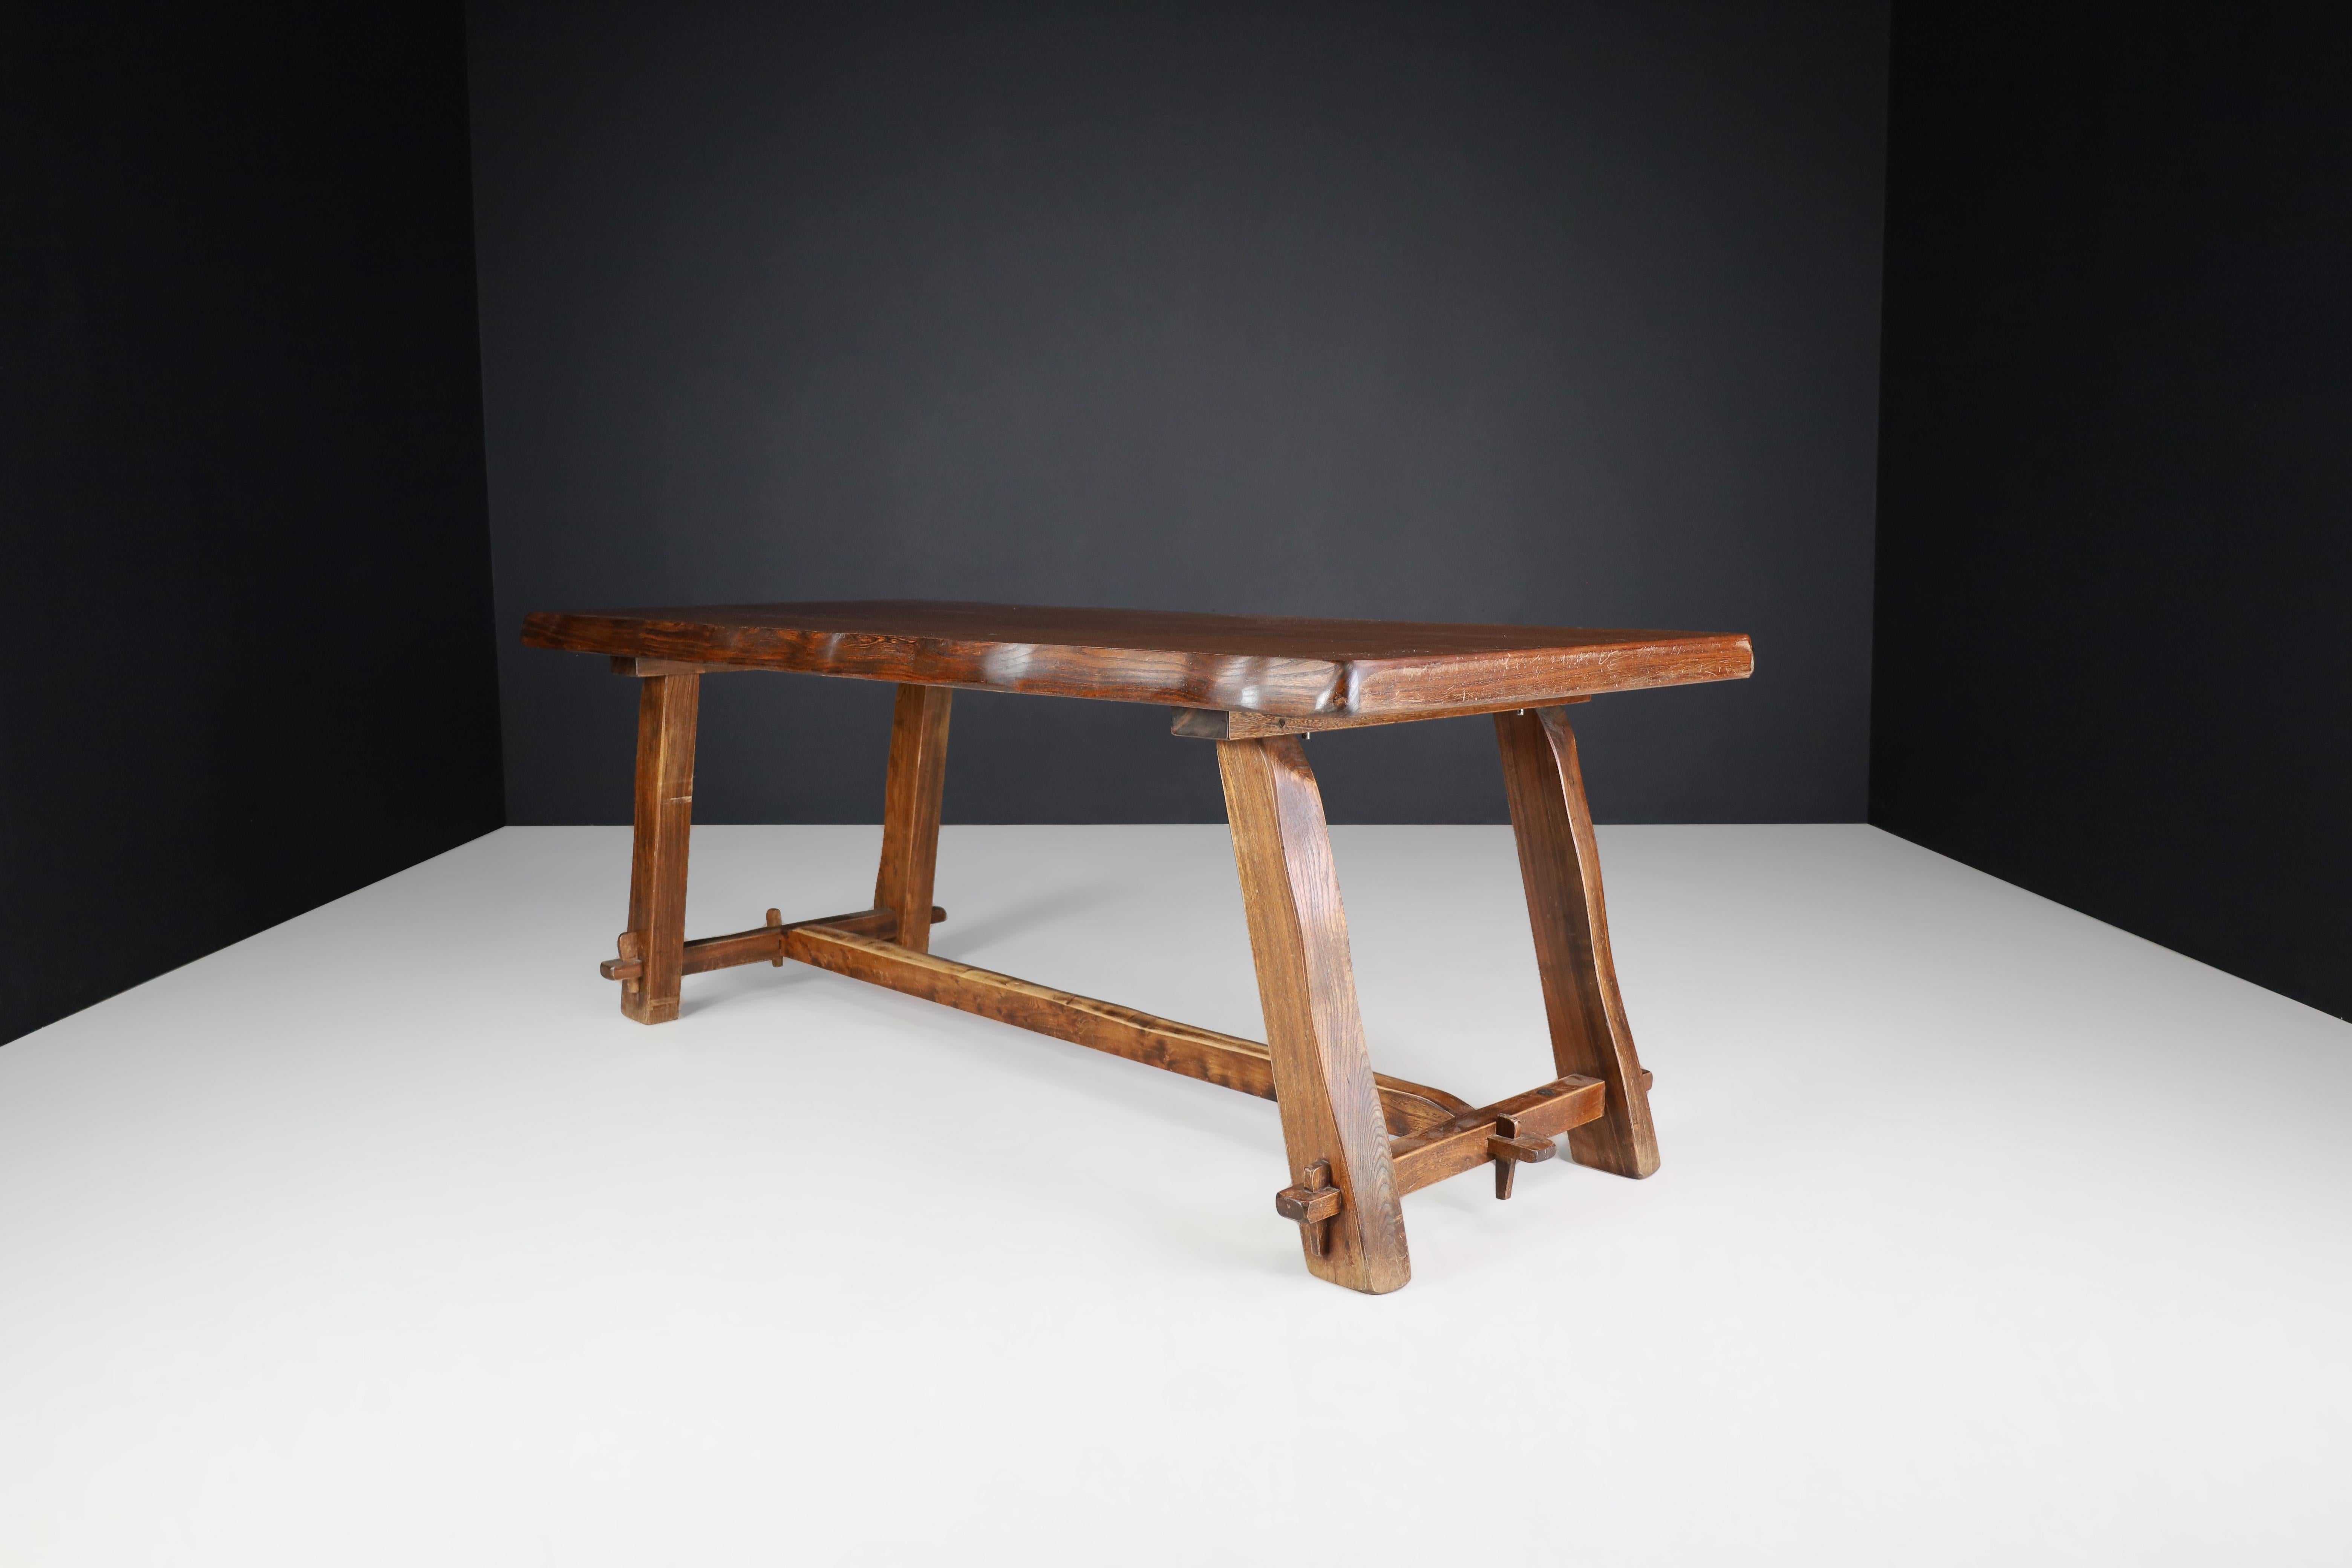 Brutalist elm dining table by Olavi Hanninen and edited by Mikko Nupponen in Finland in 1959

This Brutalist elm dining table was designed by Olavi Hanninen and edited by Mikko Nupponen in Finland in 1959. It is a versatile piece of furniture that